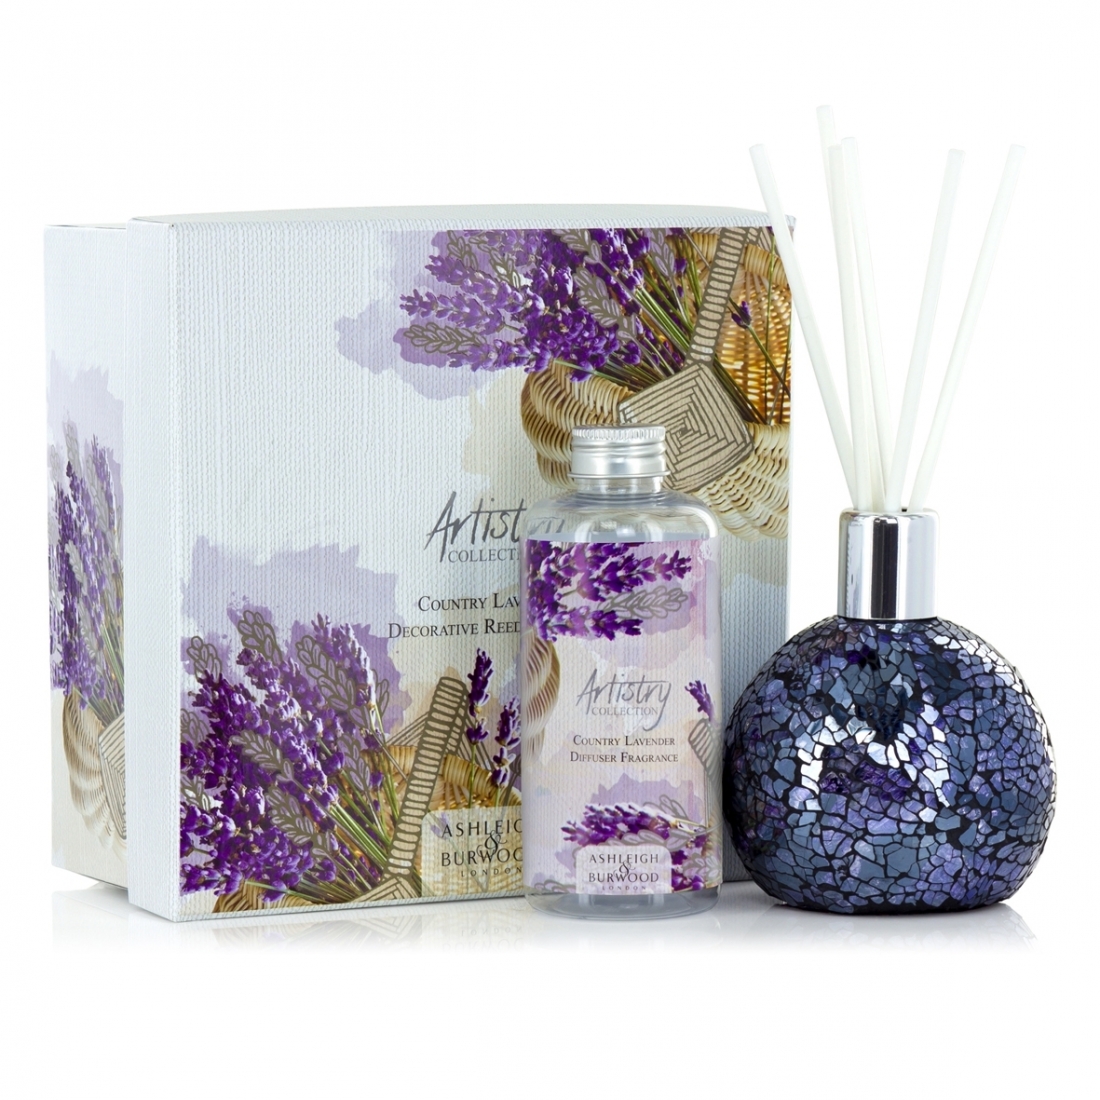 'Artistry Country Lavender' Reed Diffuser Set - 2 Pieces